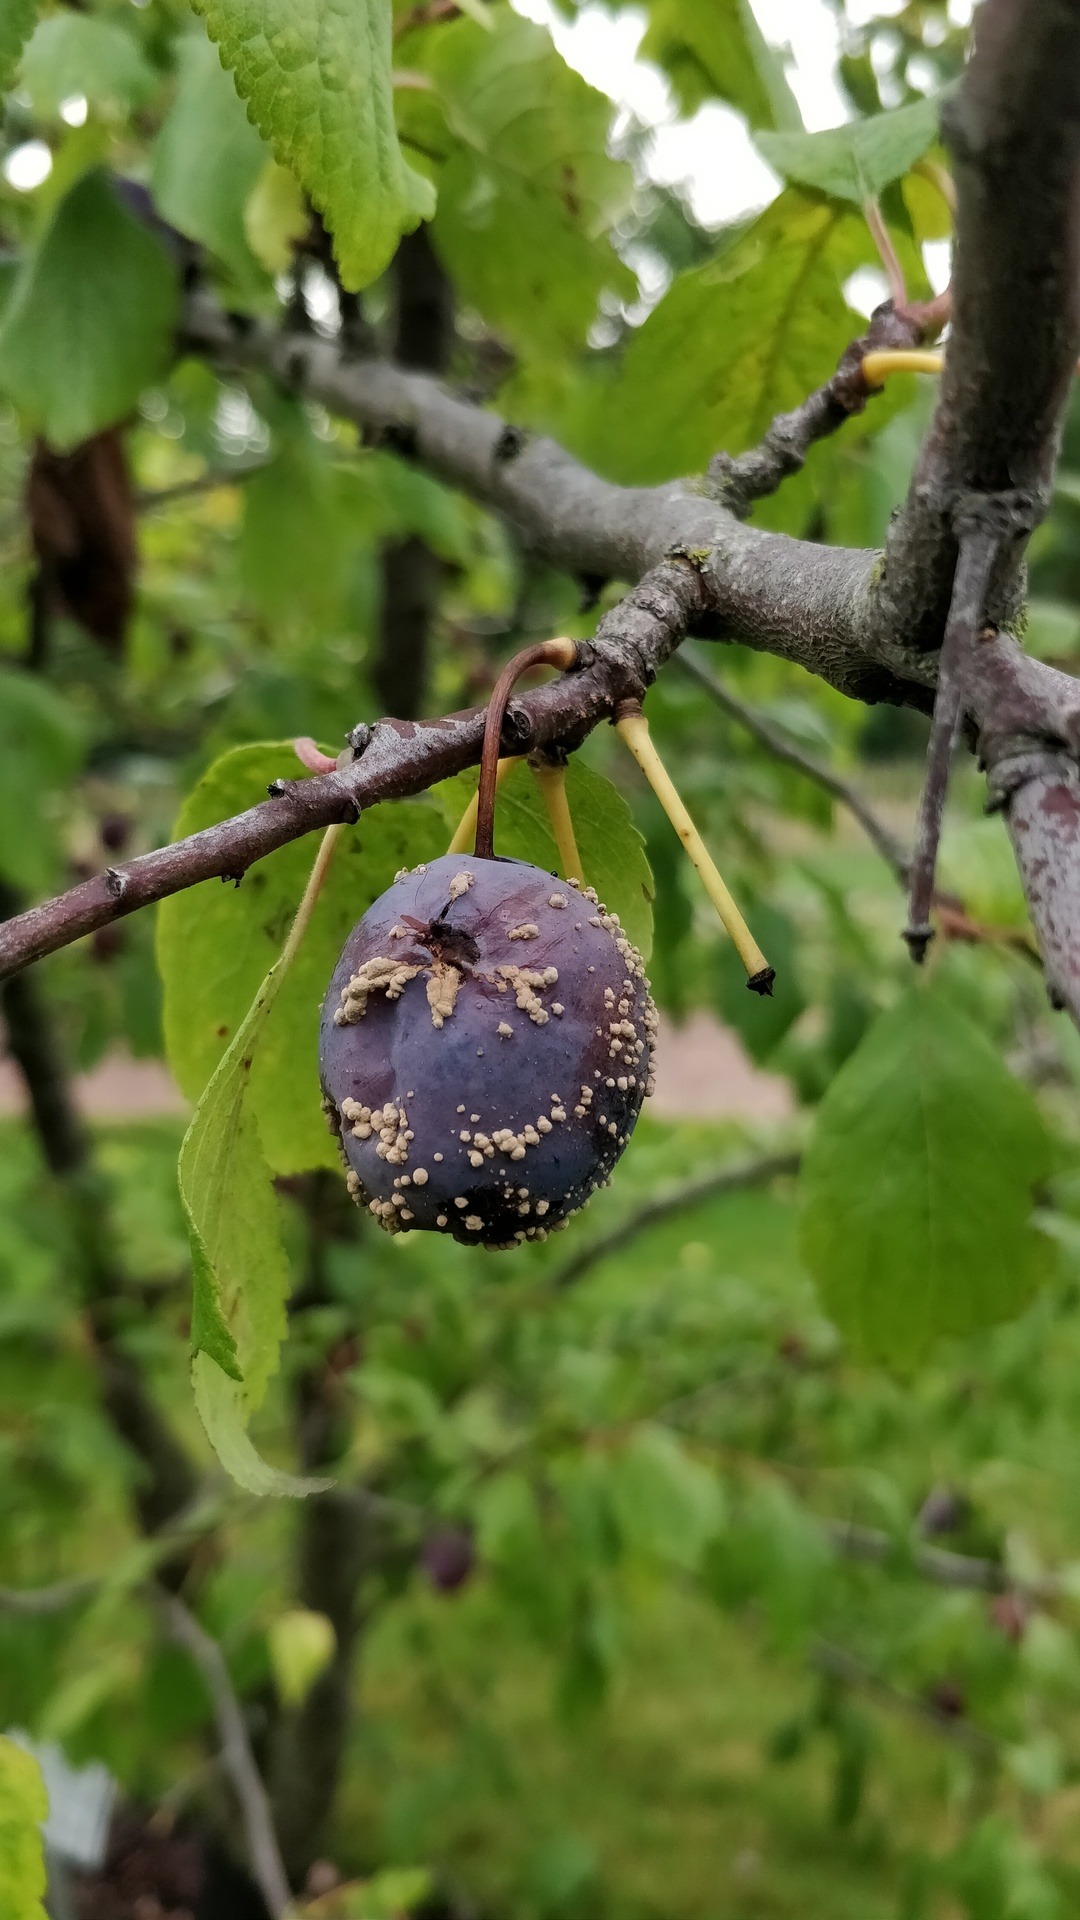 Monilinia fructigena -fungus causing a fruit rot of plums, pears and apples.